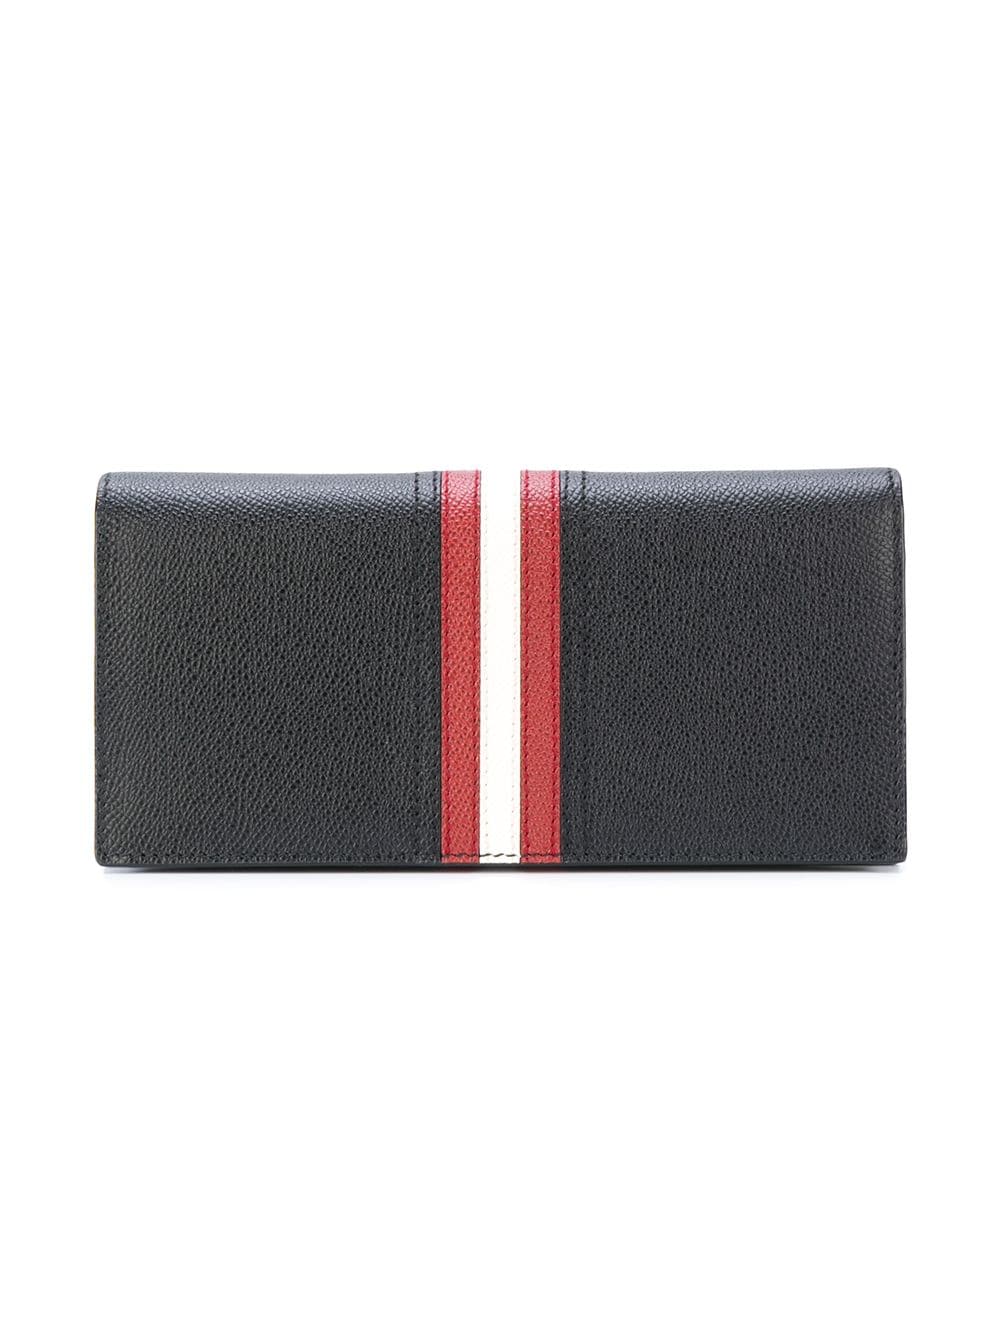 Image 2 of Bally stripe continental wallet